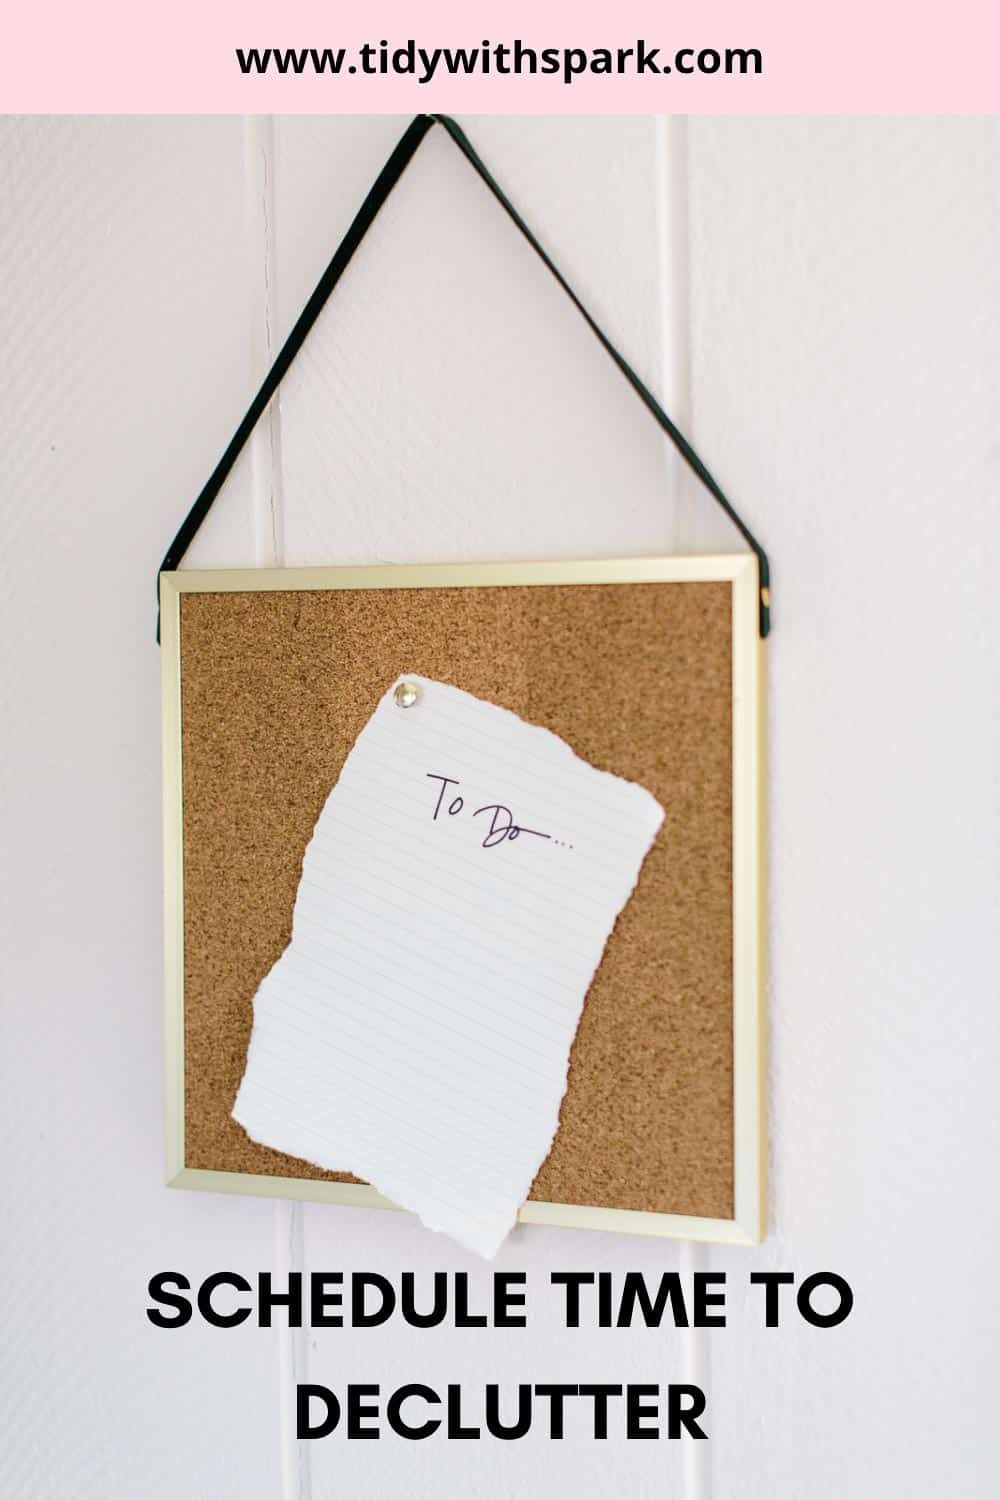 Cork board hung on wall with black string with to-do note pinned with text overlay "schedule time to declutter"